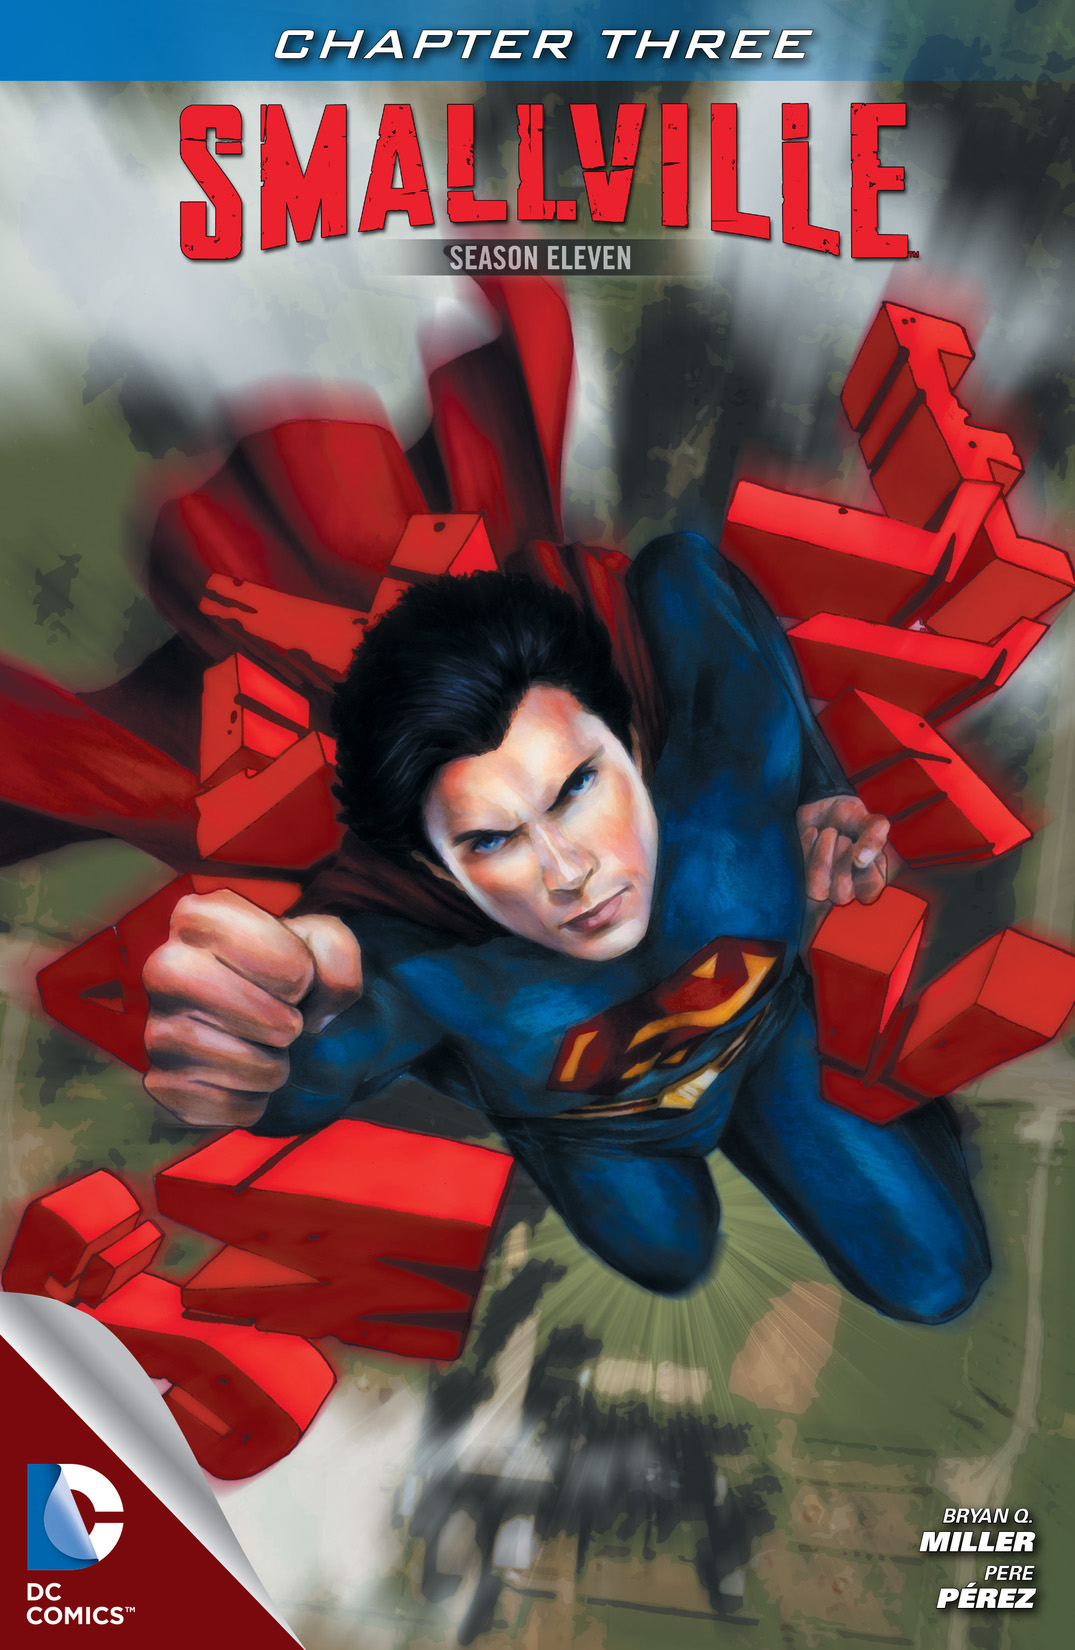 Smallville Season 11 #3 preview images